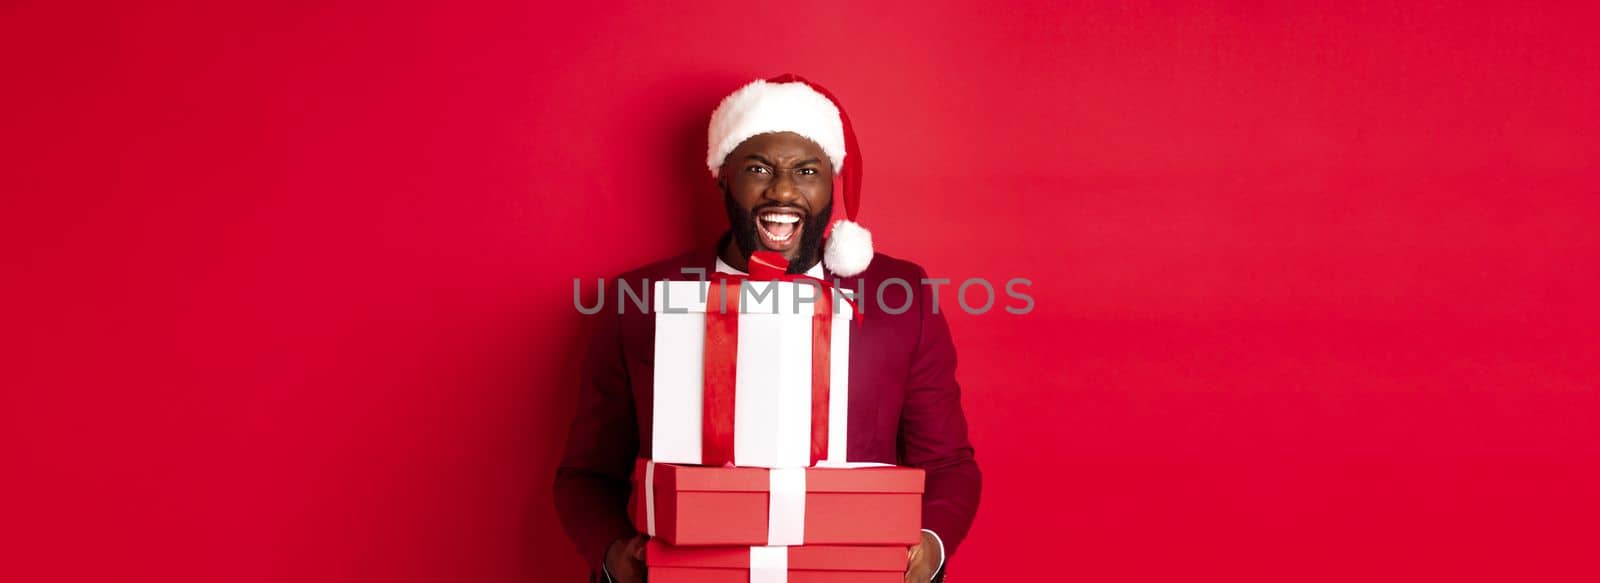 Christmas, New Year and shopping concept. Happy Black man in santa hat and blazer holding xmas presents, bring gifts and smiling, standing against red background.